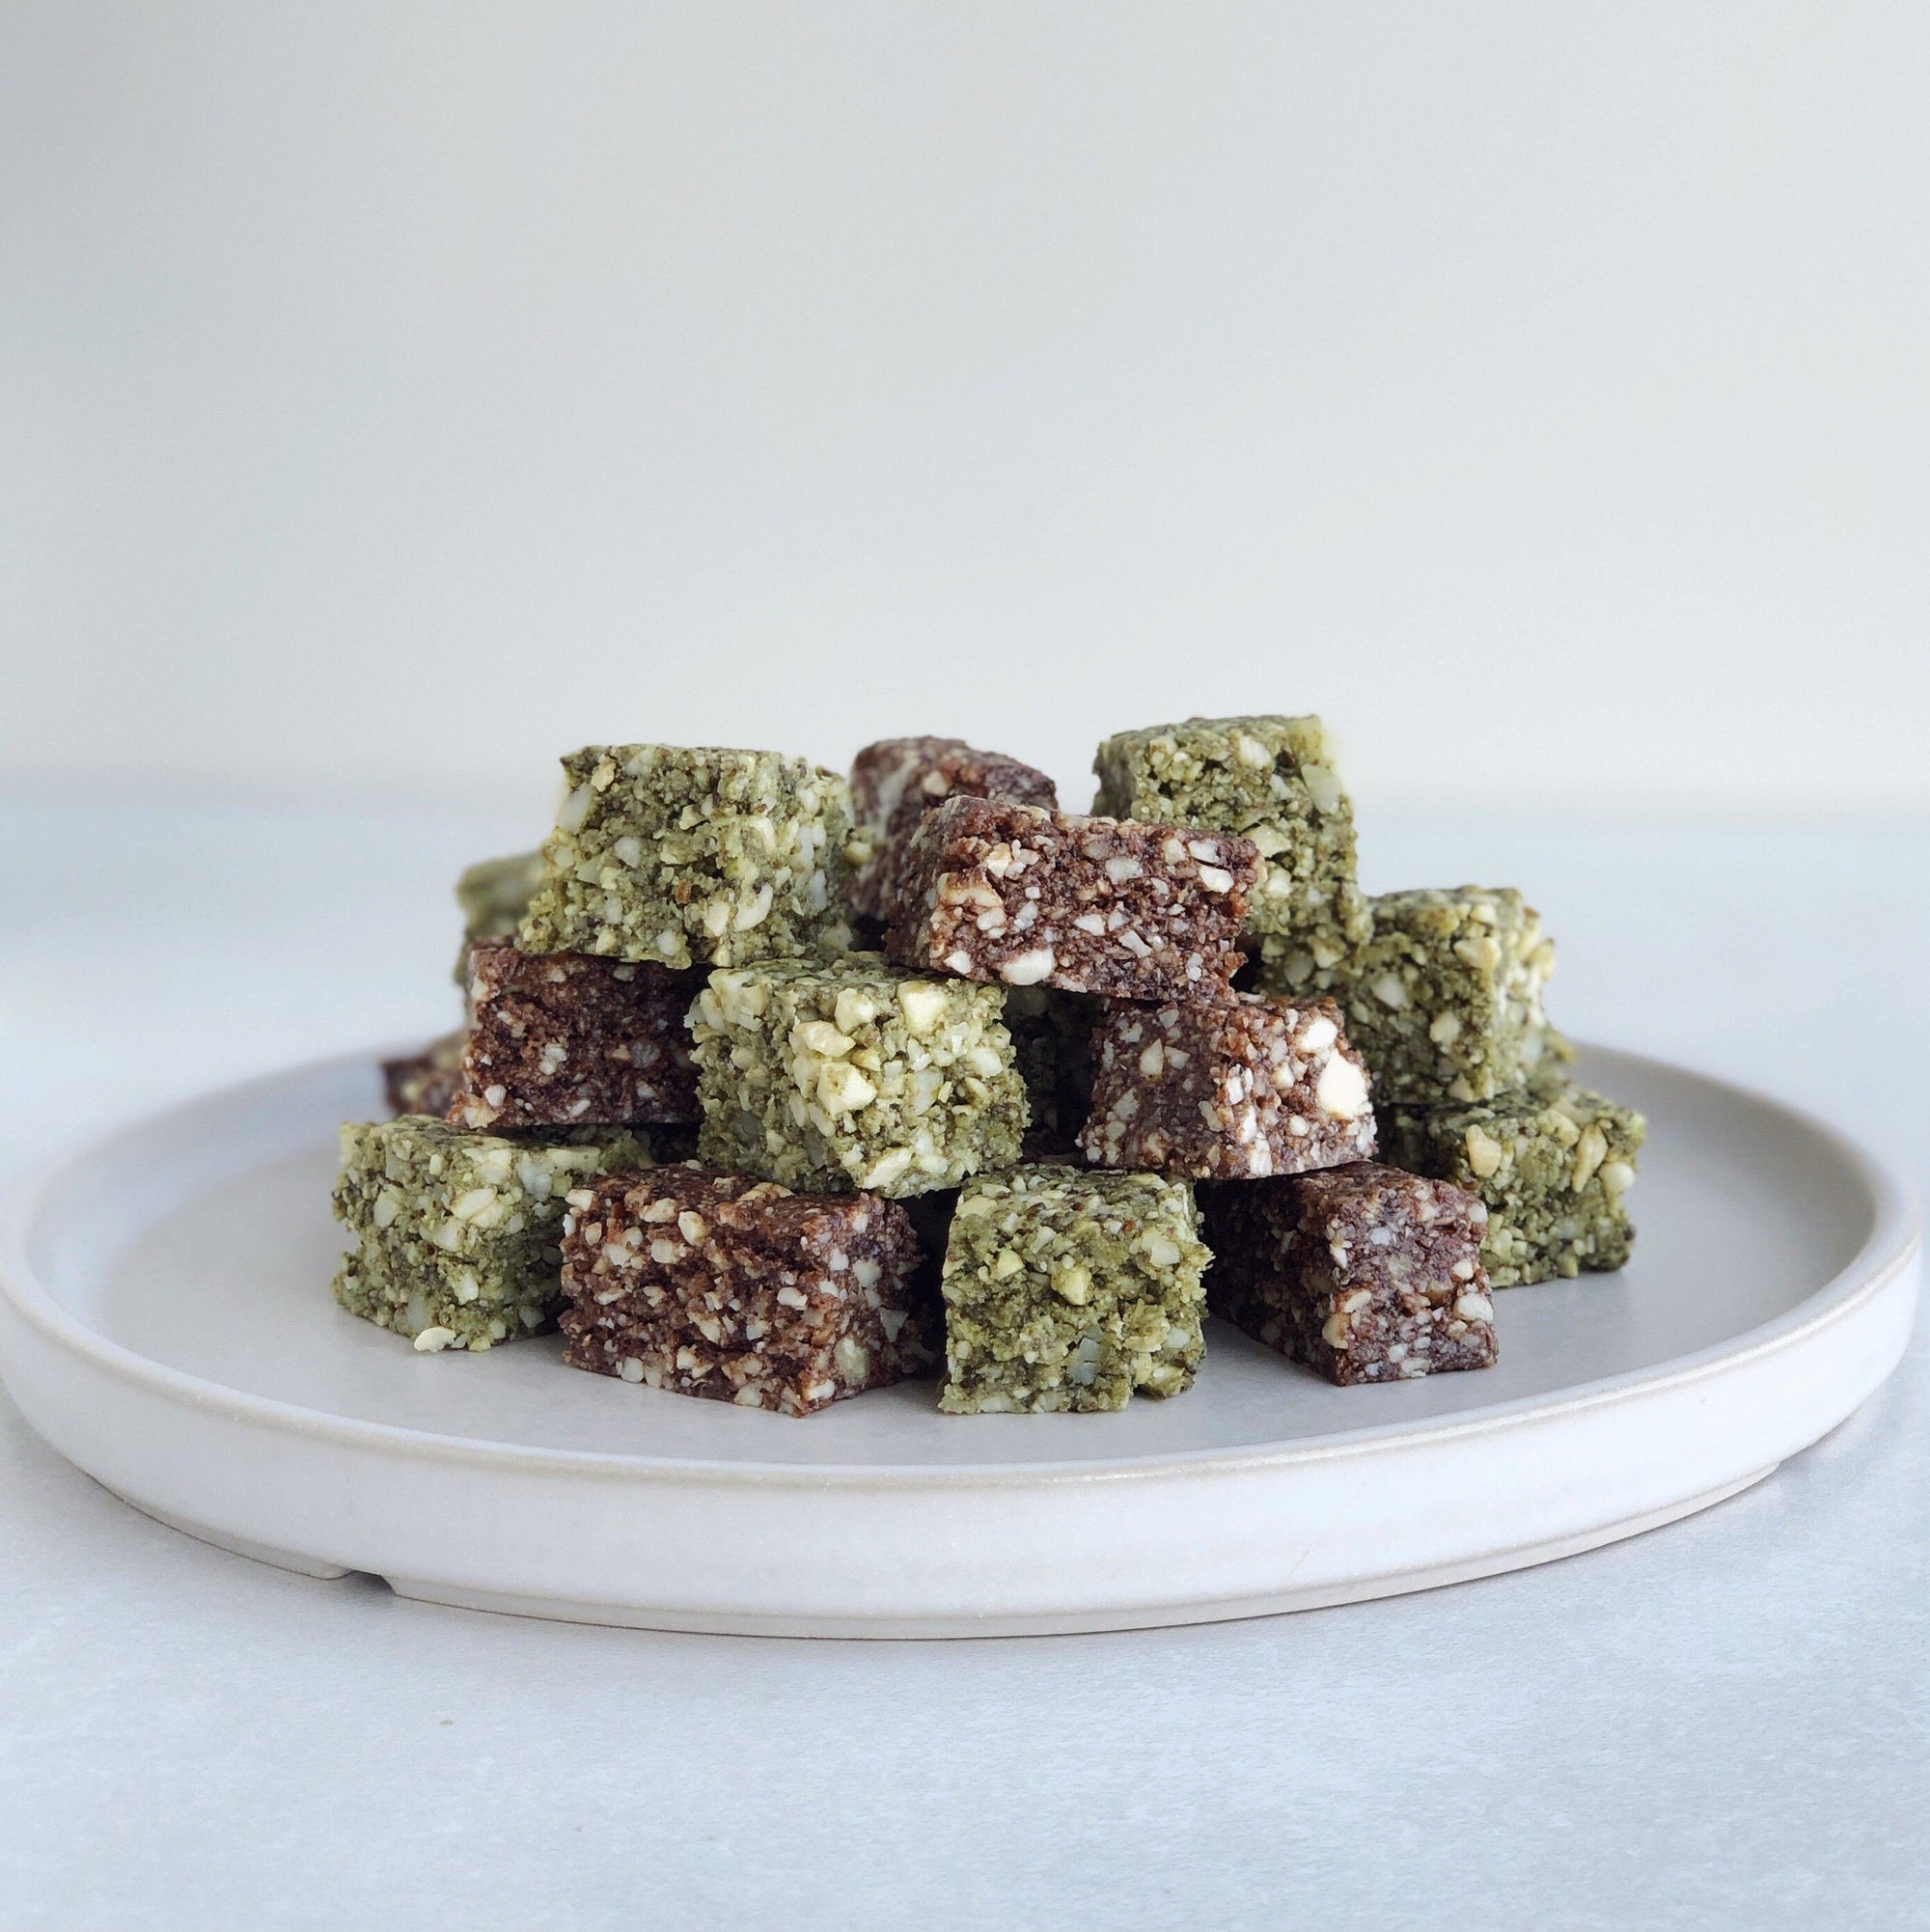 Plate of superfood bites featuring JOYÀ Matcha and Cacao elixirs